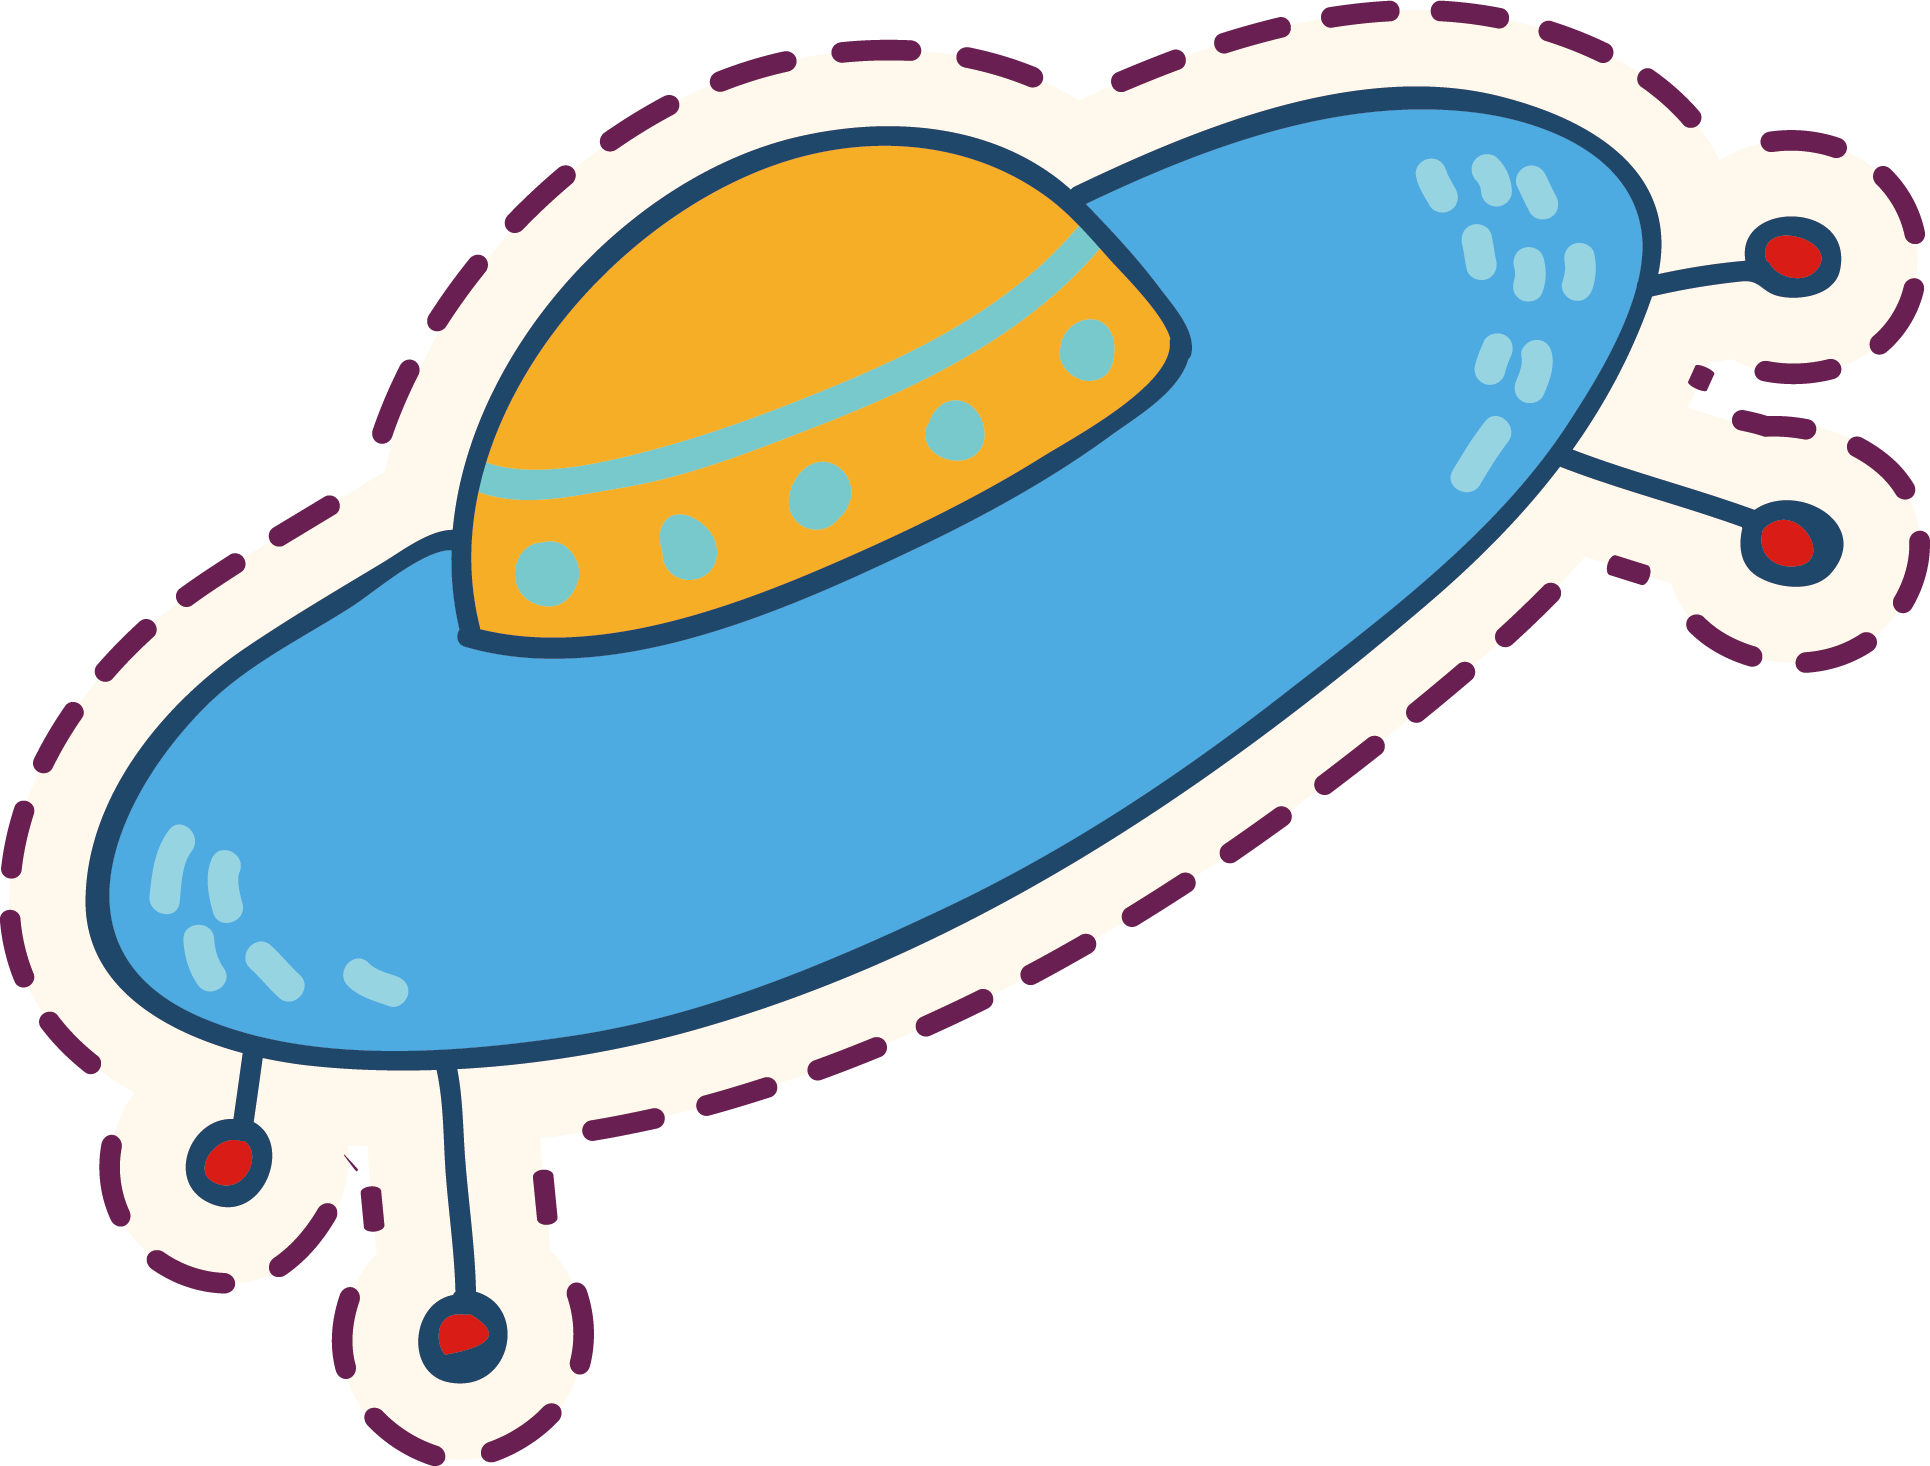 Flying Saucer Unidentified Flying Object Cartoon - Flying Saucer Unidentified Flying Object Cartoon (1930x1466)